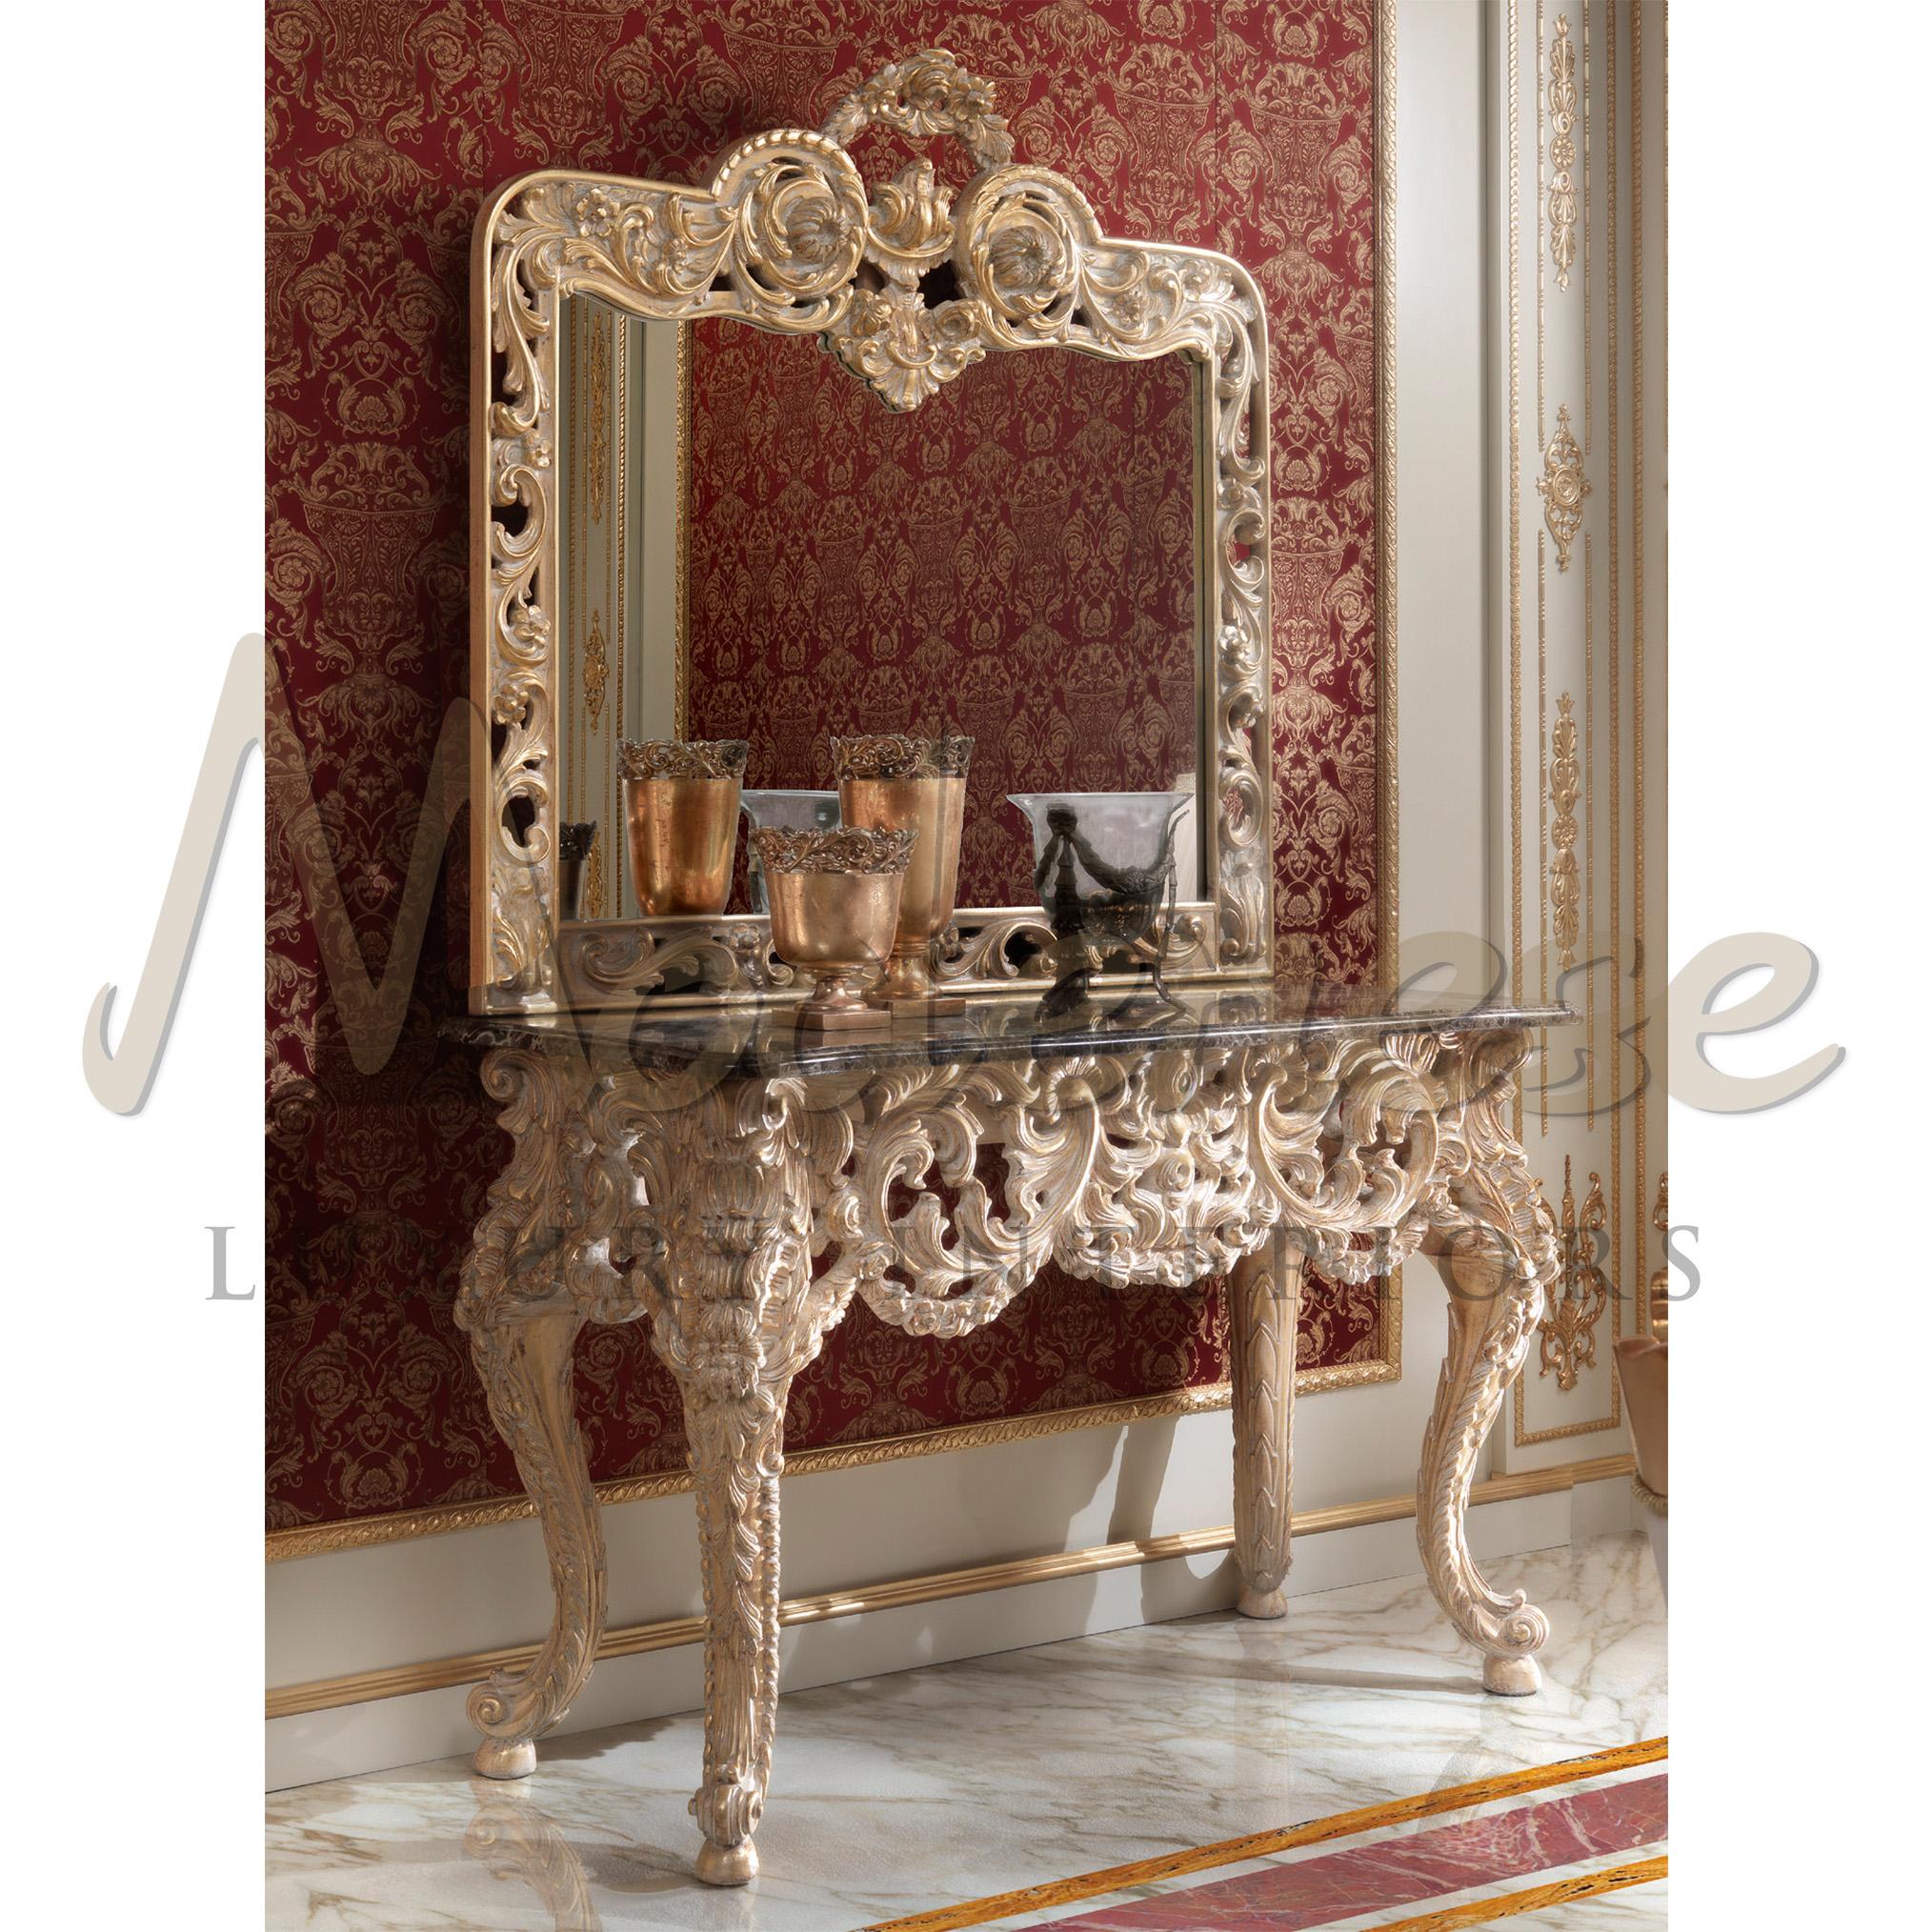 This wonderfully designed console is part of Modenese Luxury Interiors' masterpieces collection. The baroque shape of the full structure highlights the focus of our artisans on hand-carving woodworking, which has been carried on from father to son.